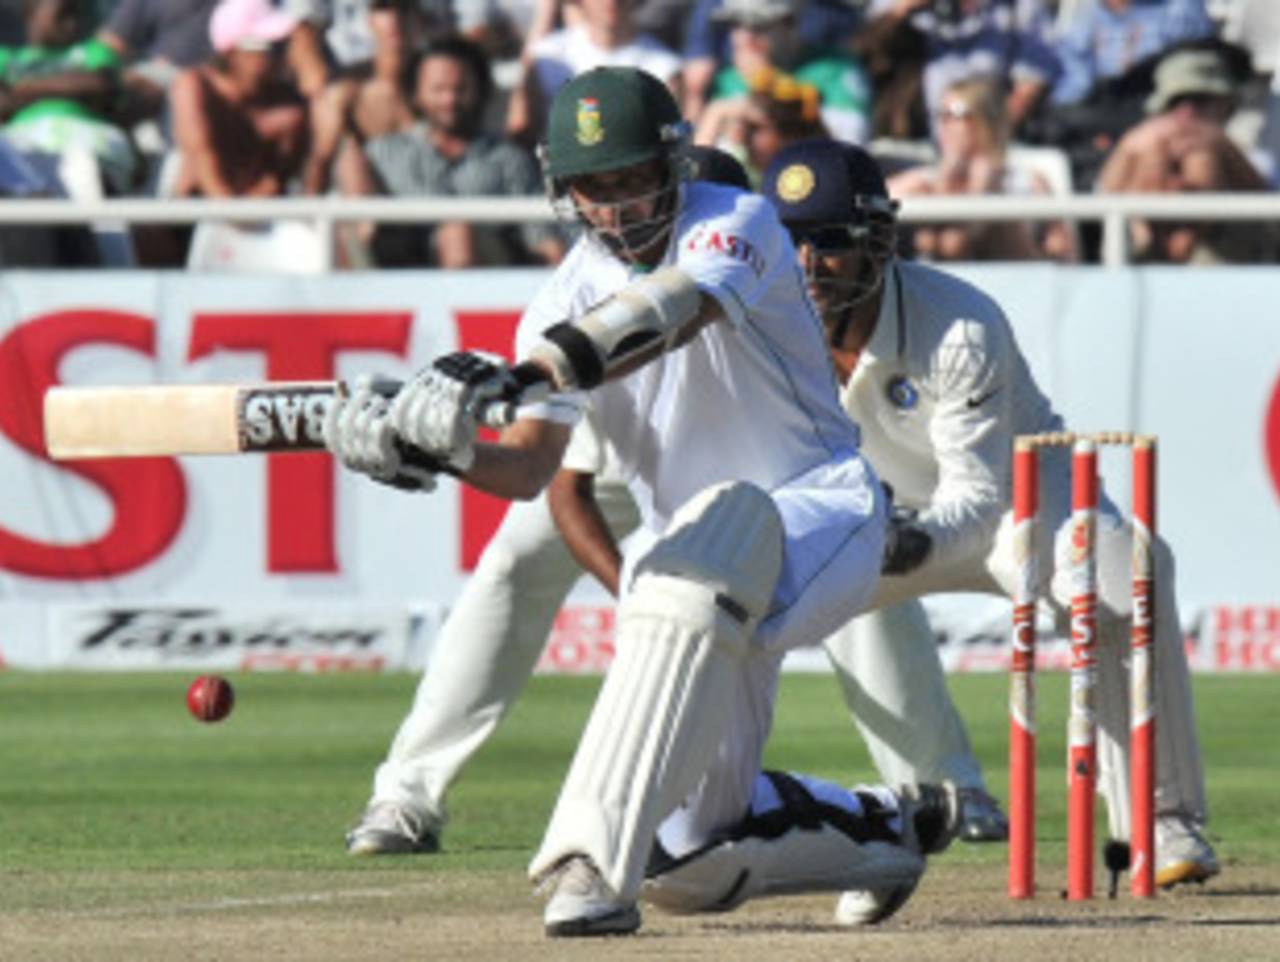 Alviro Petersen could make the opener's slot his own with a big score&nbsp;&nbsp;&bull;&nbsp;&nbsp;AFP / Getty Images